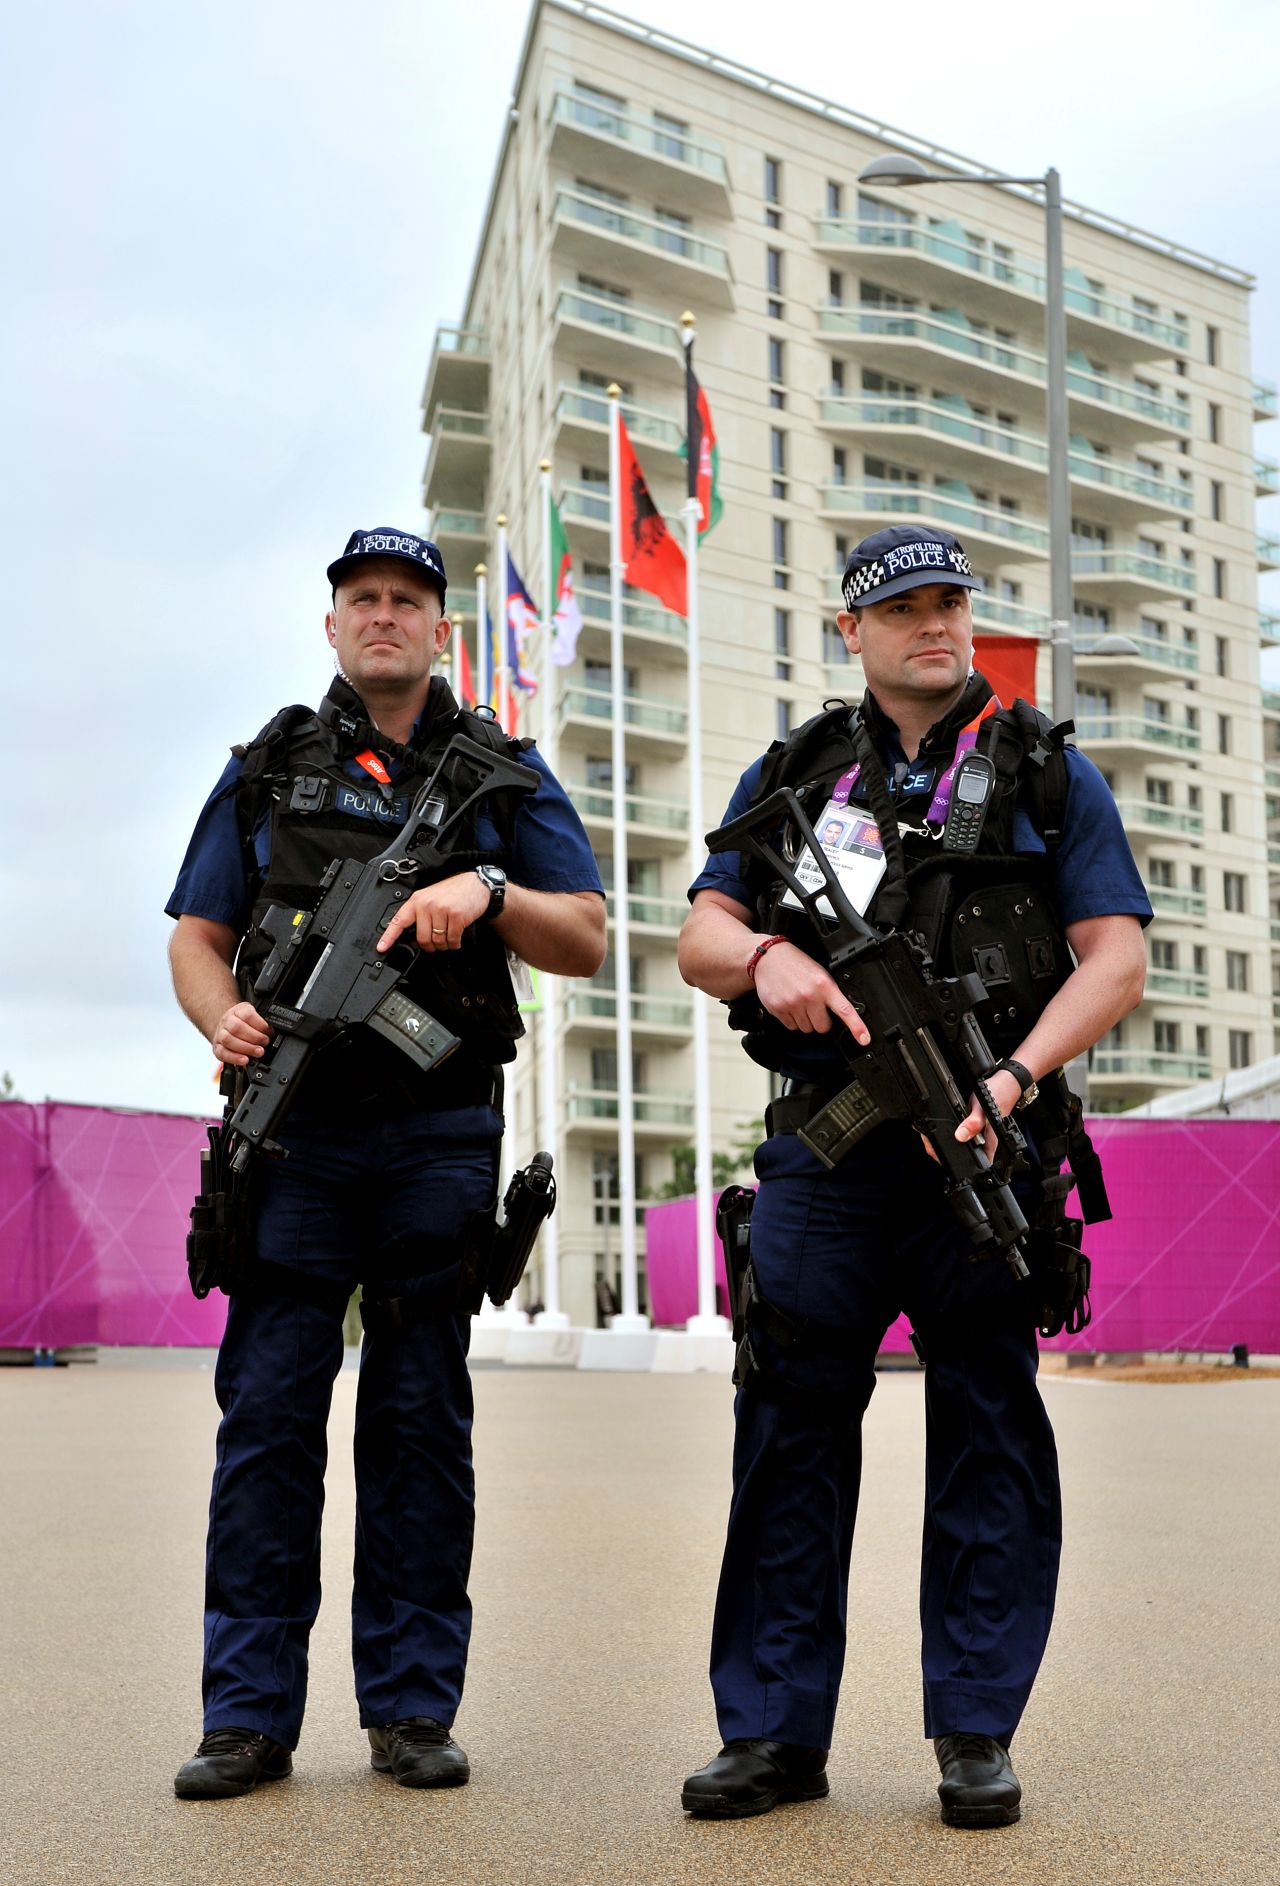 Armed military personel have been called in to beef up security after the Olympics' private security contractor failed to produce enough staff for the Games. 